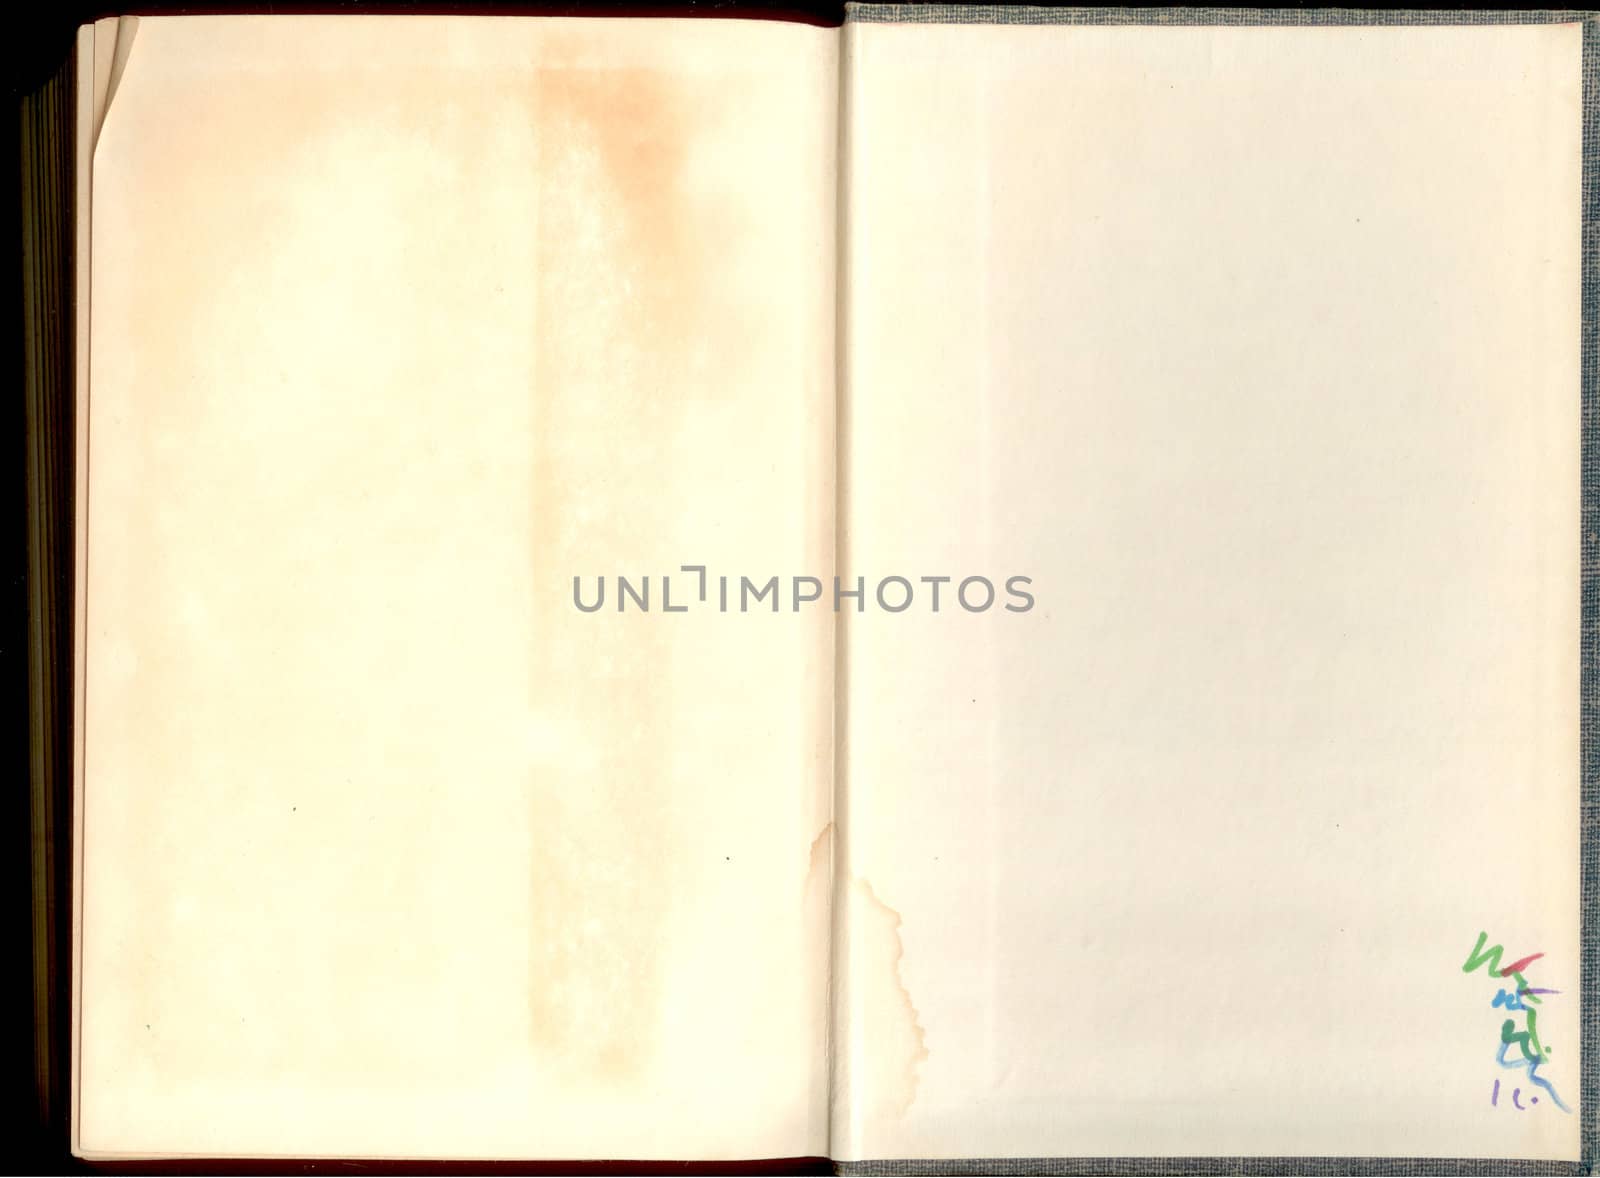 Old antique paper from a book or note pad blank retro background